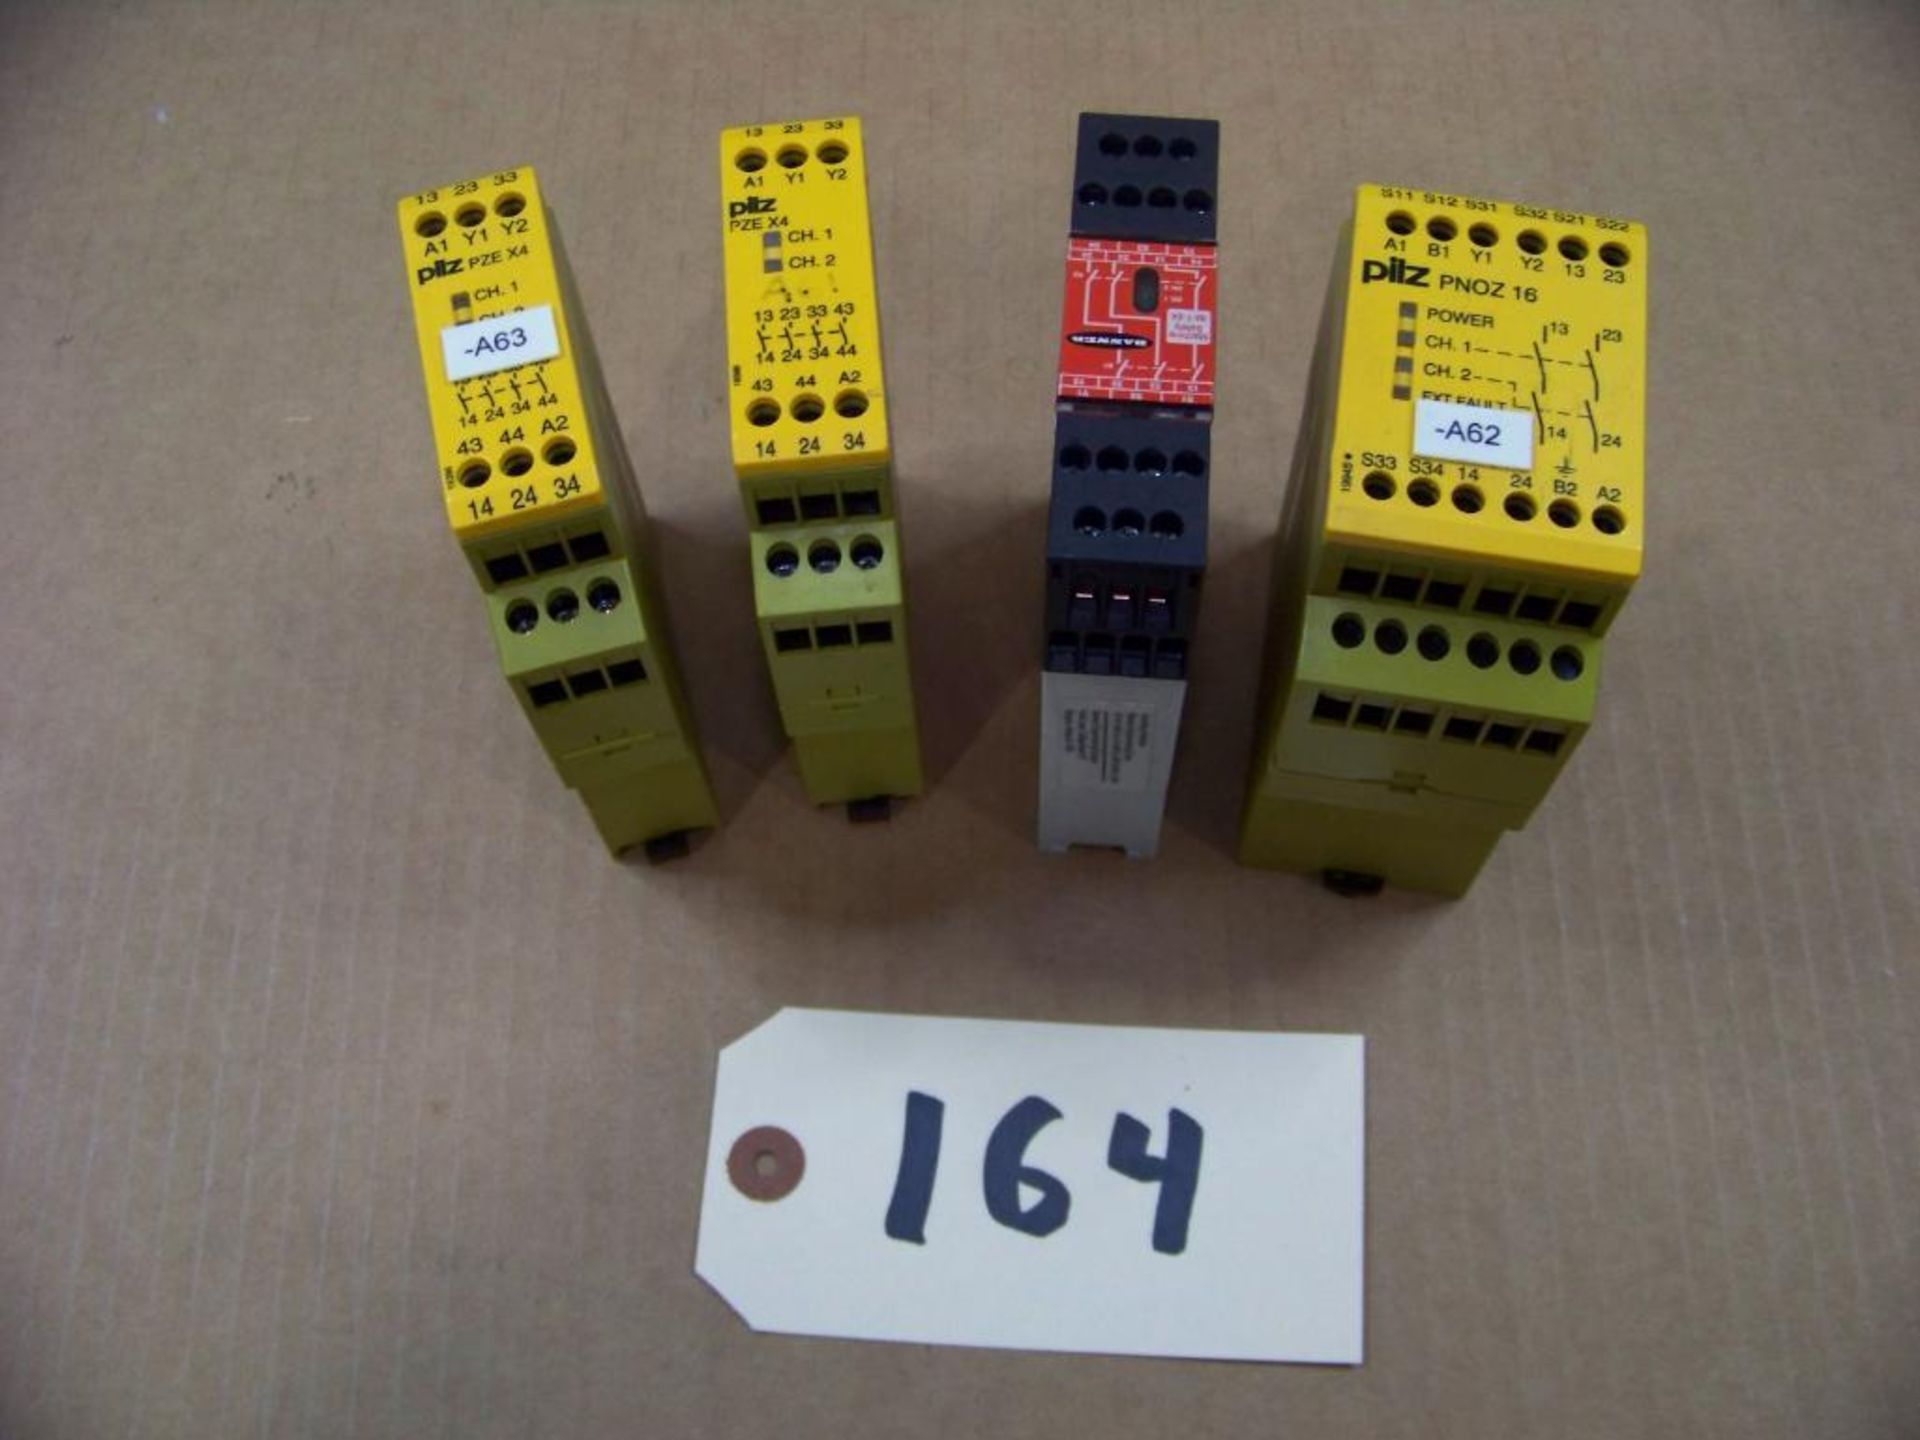 1 -BANNER, 3 - PILZ SAFETY RELAYS